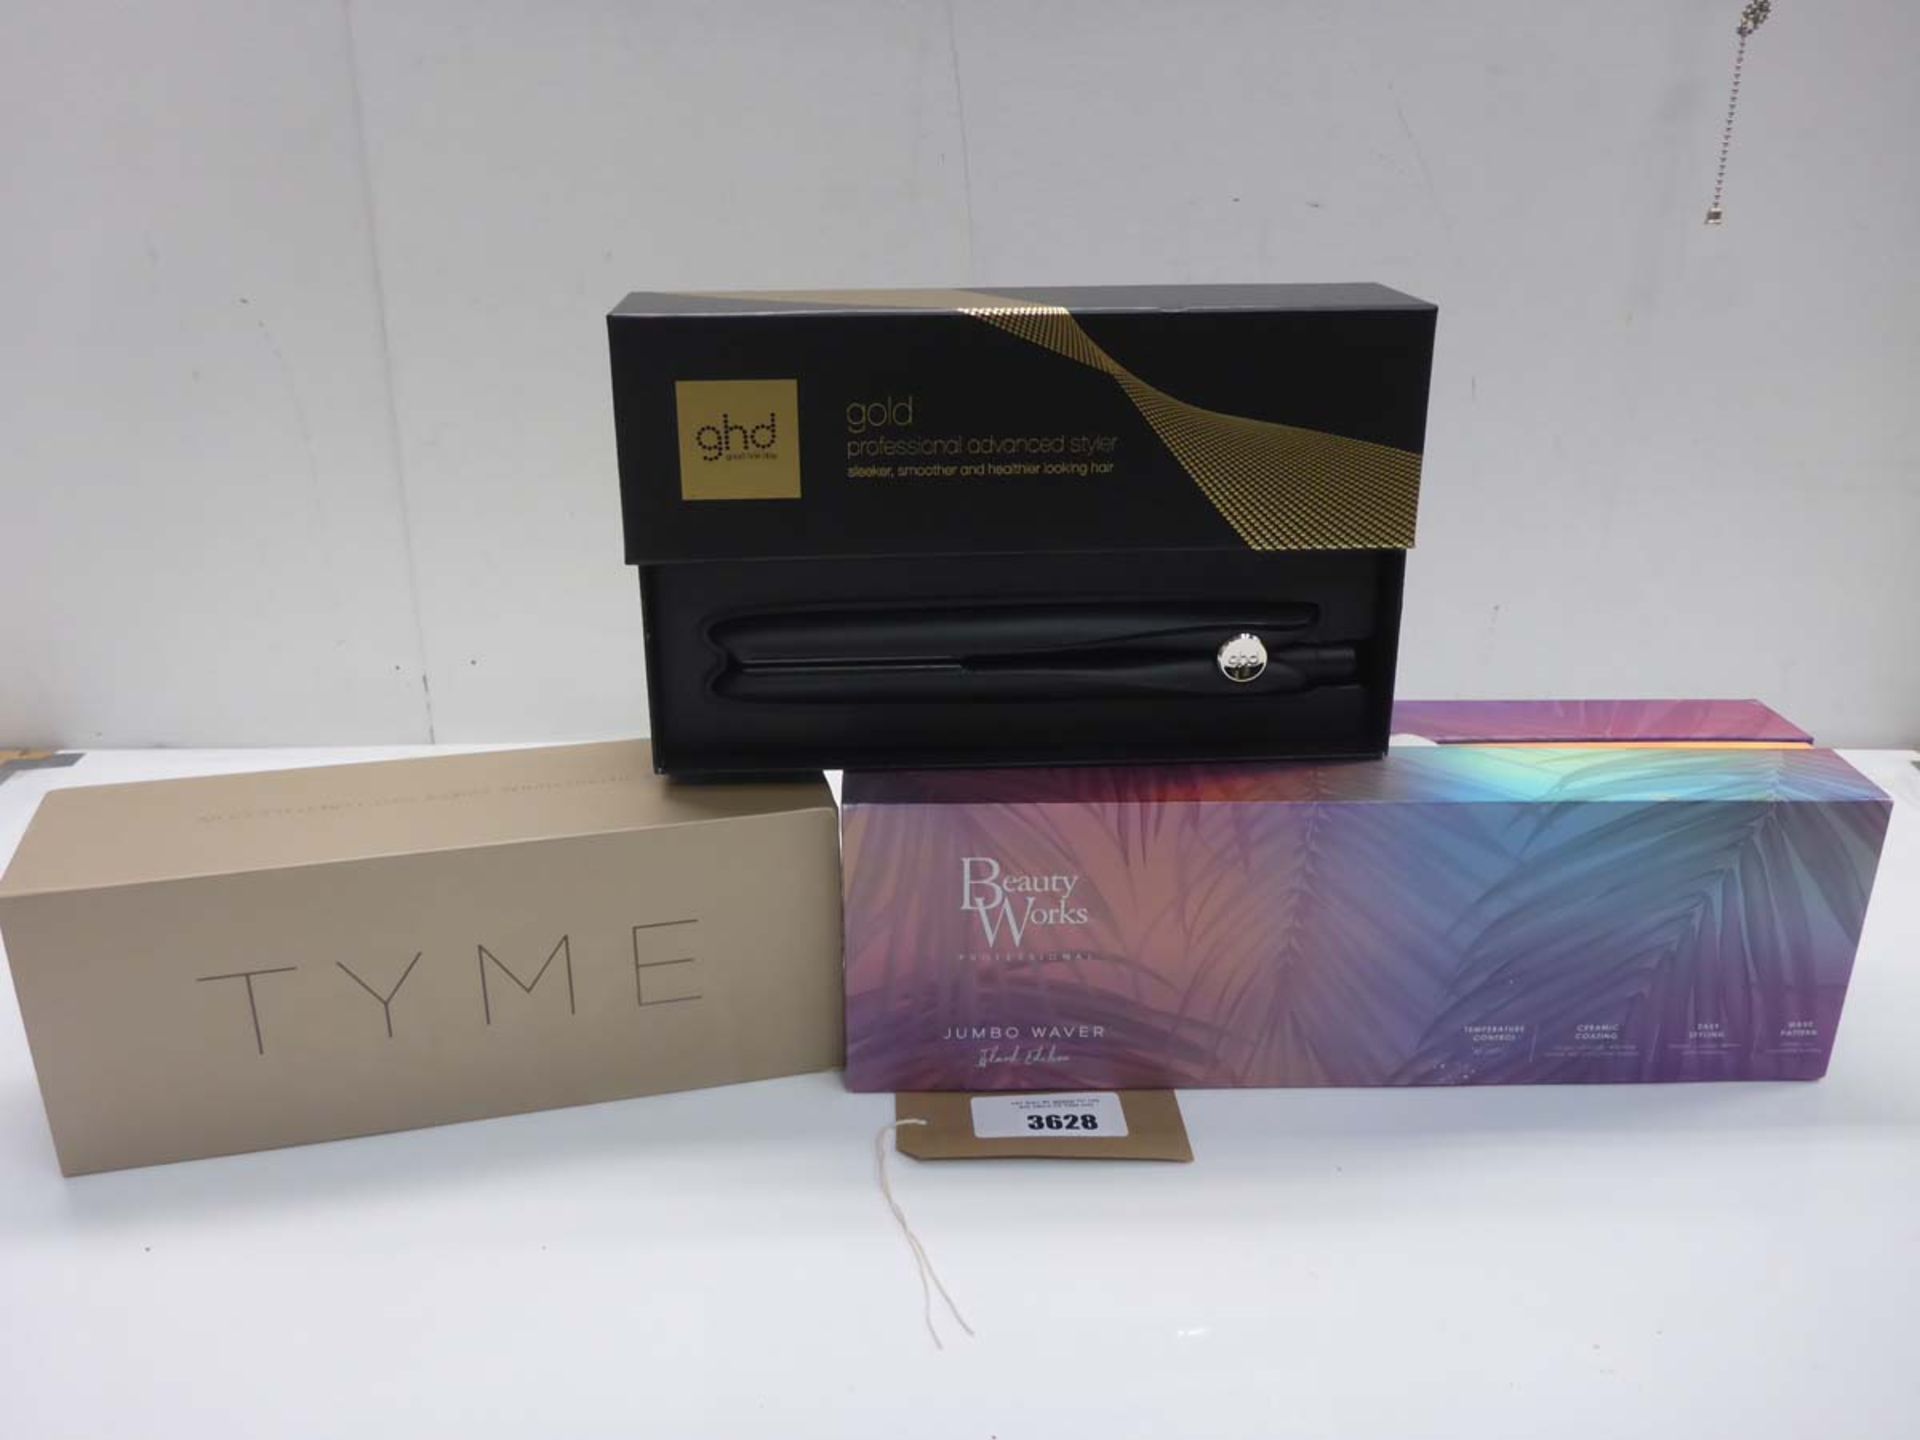 GHD Gold professional advanced styler, Beauty Works jumbo waver and TYME hair styler